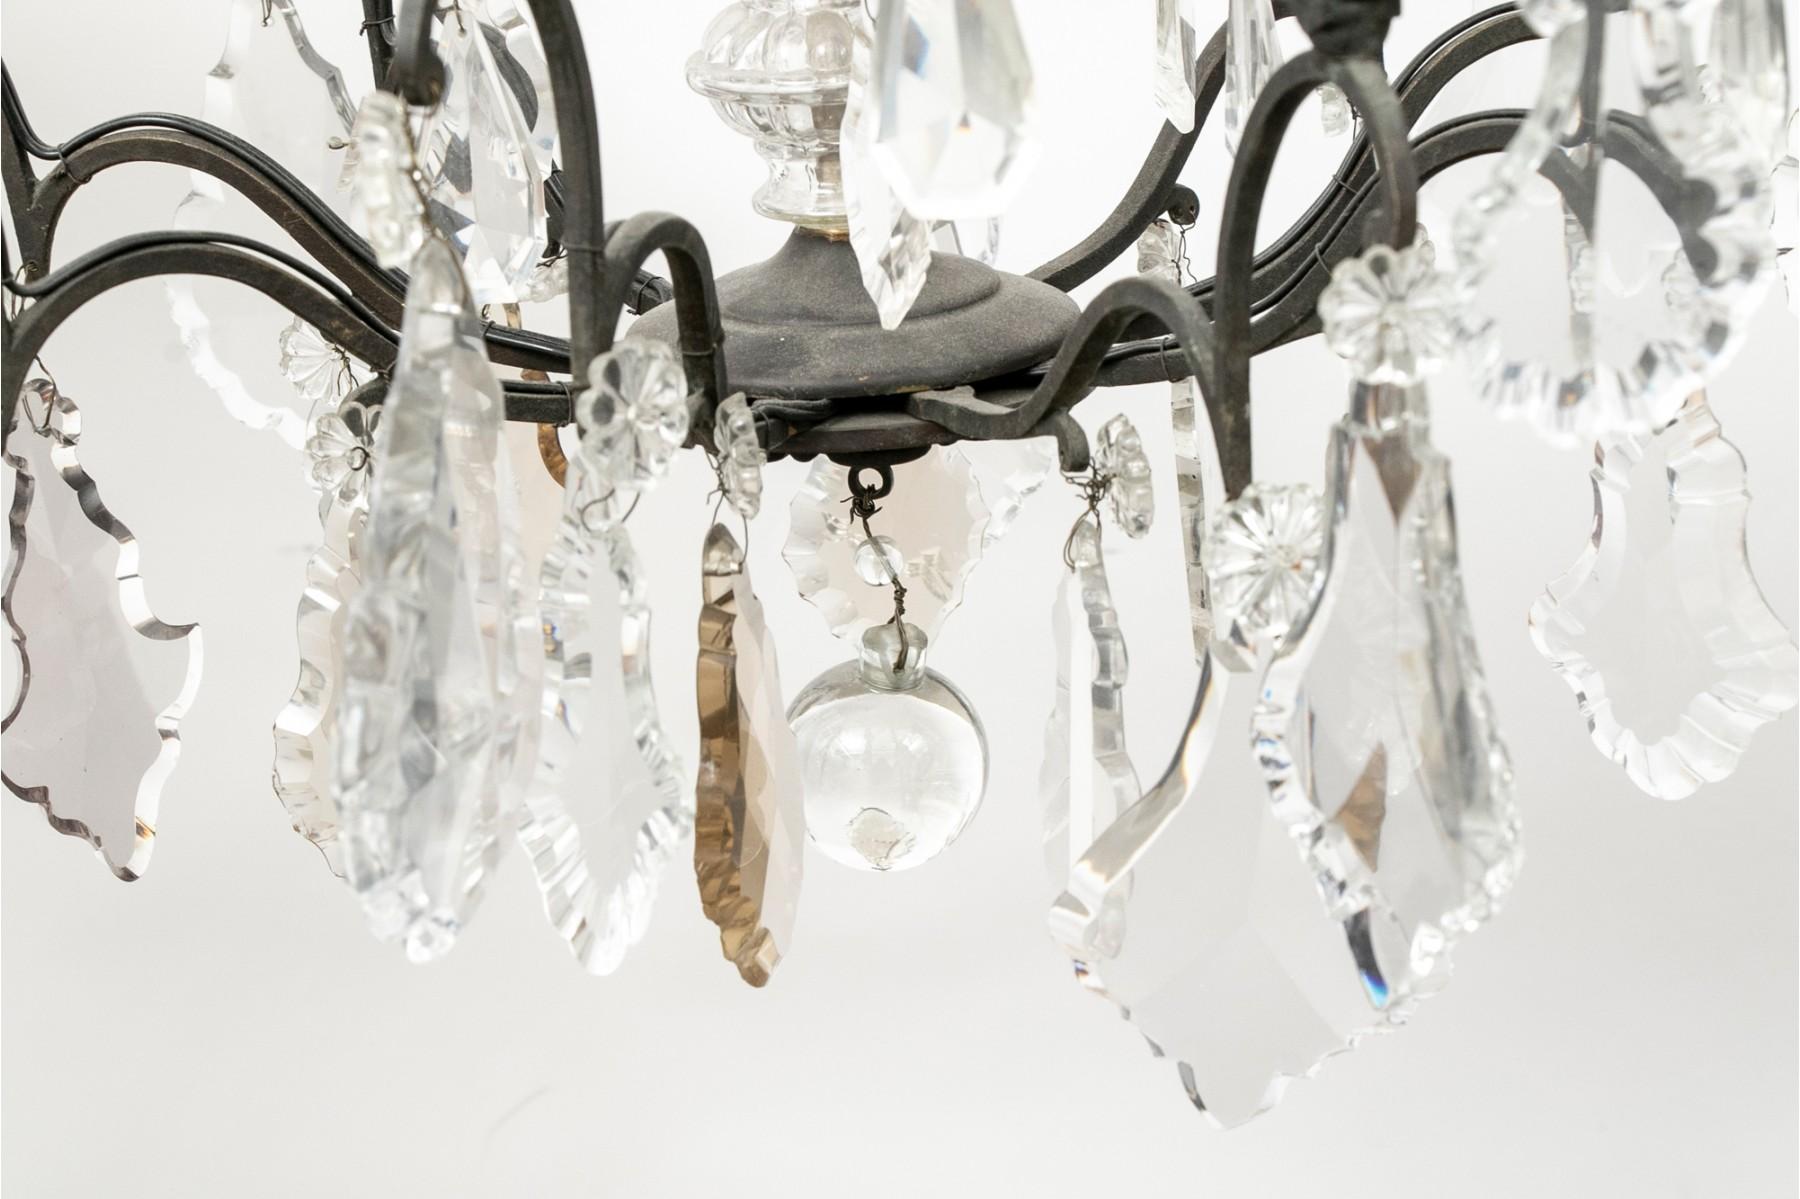 An elegant large, crystal chandelier with 6 lights with cut glass and crystal components. This classic French chandelier dates from about 1920 and has recently been rewired. Very good vintage condition. 

LC0421-01

Dimensions: 36